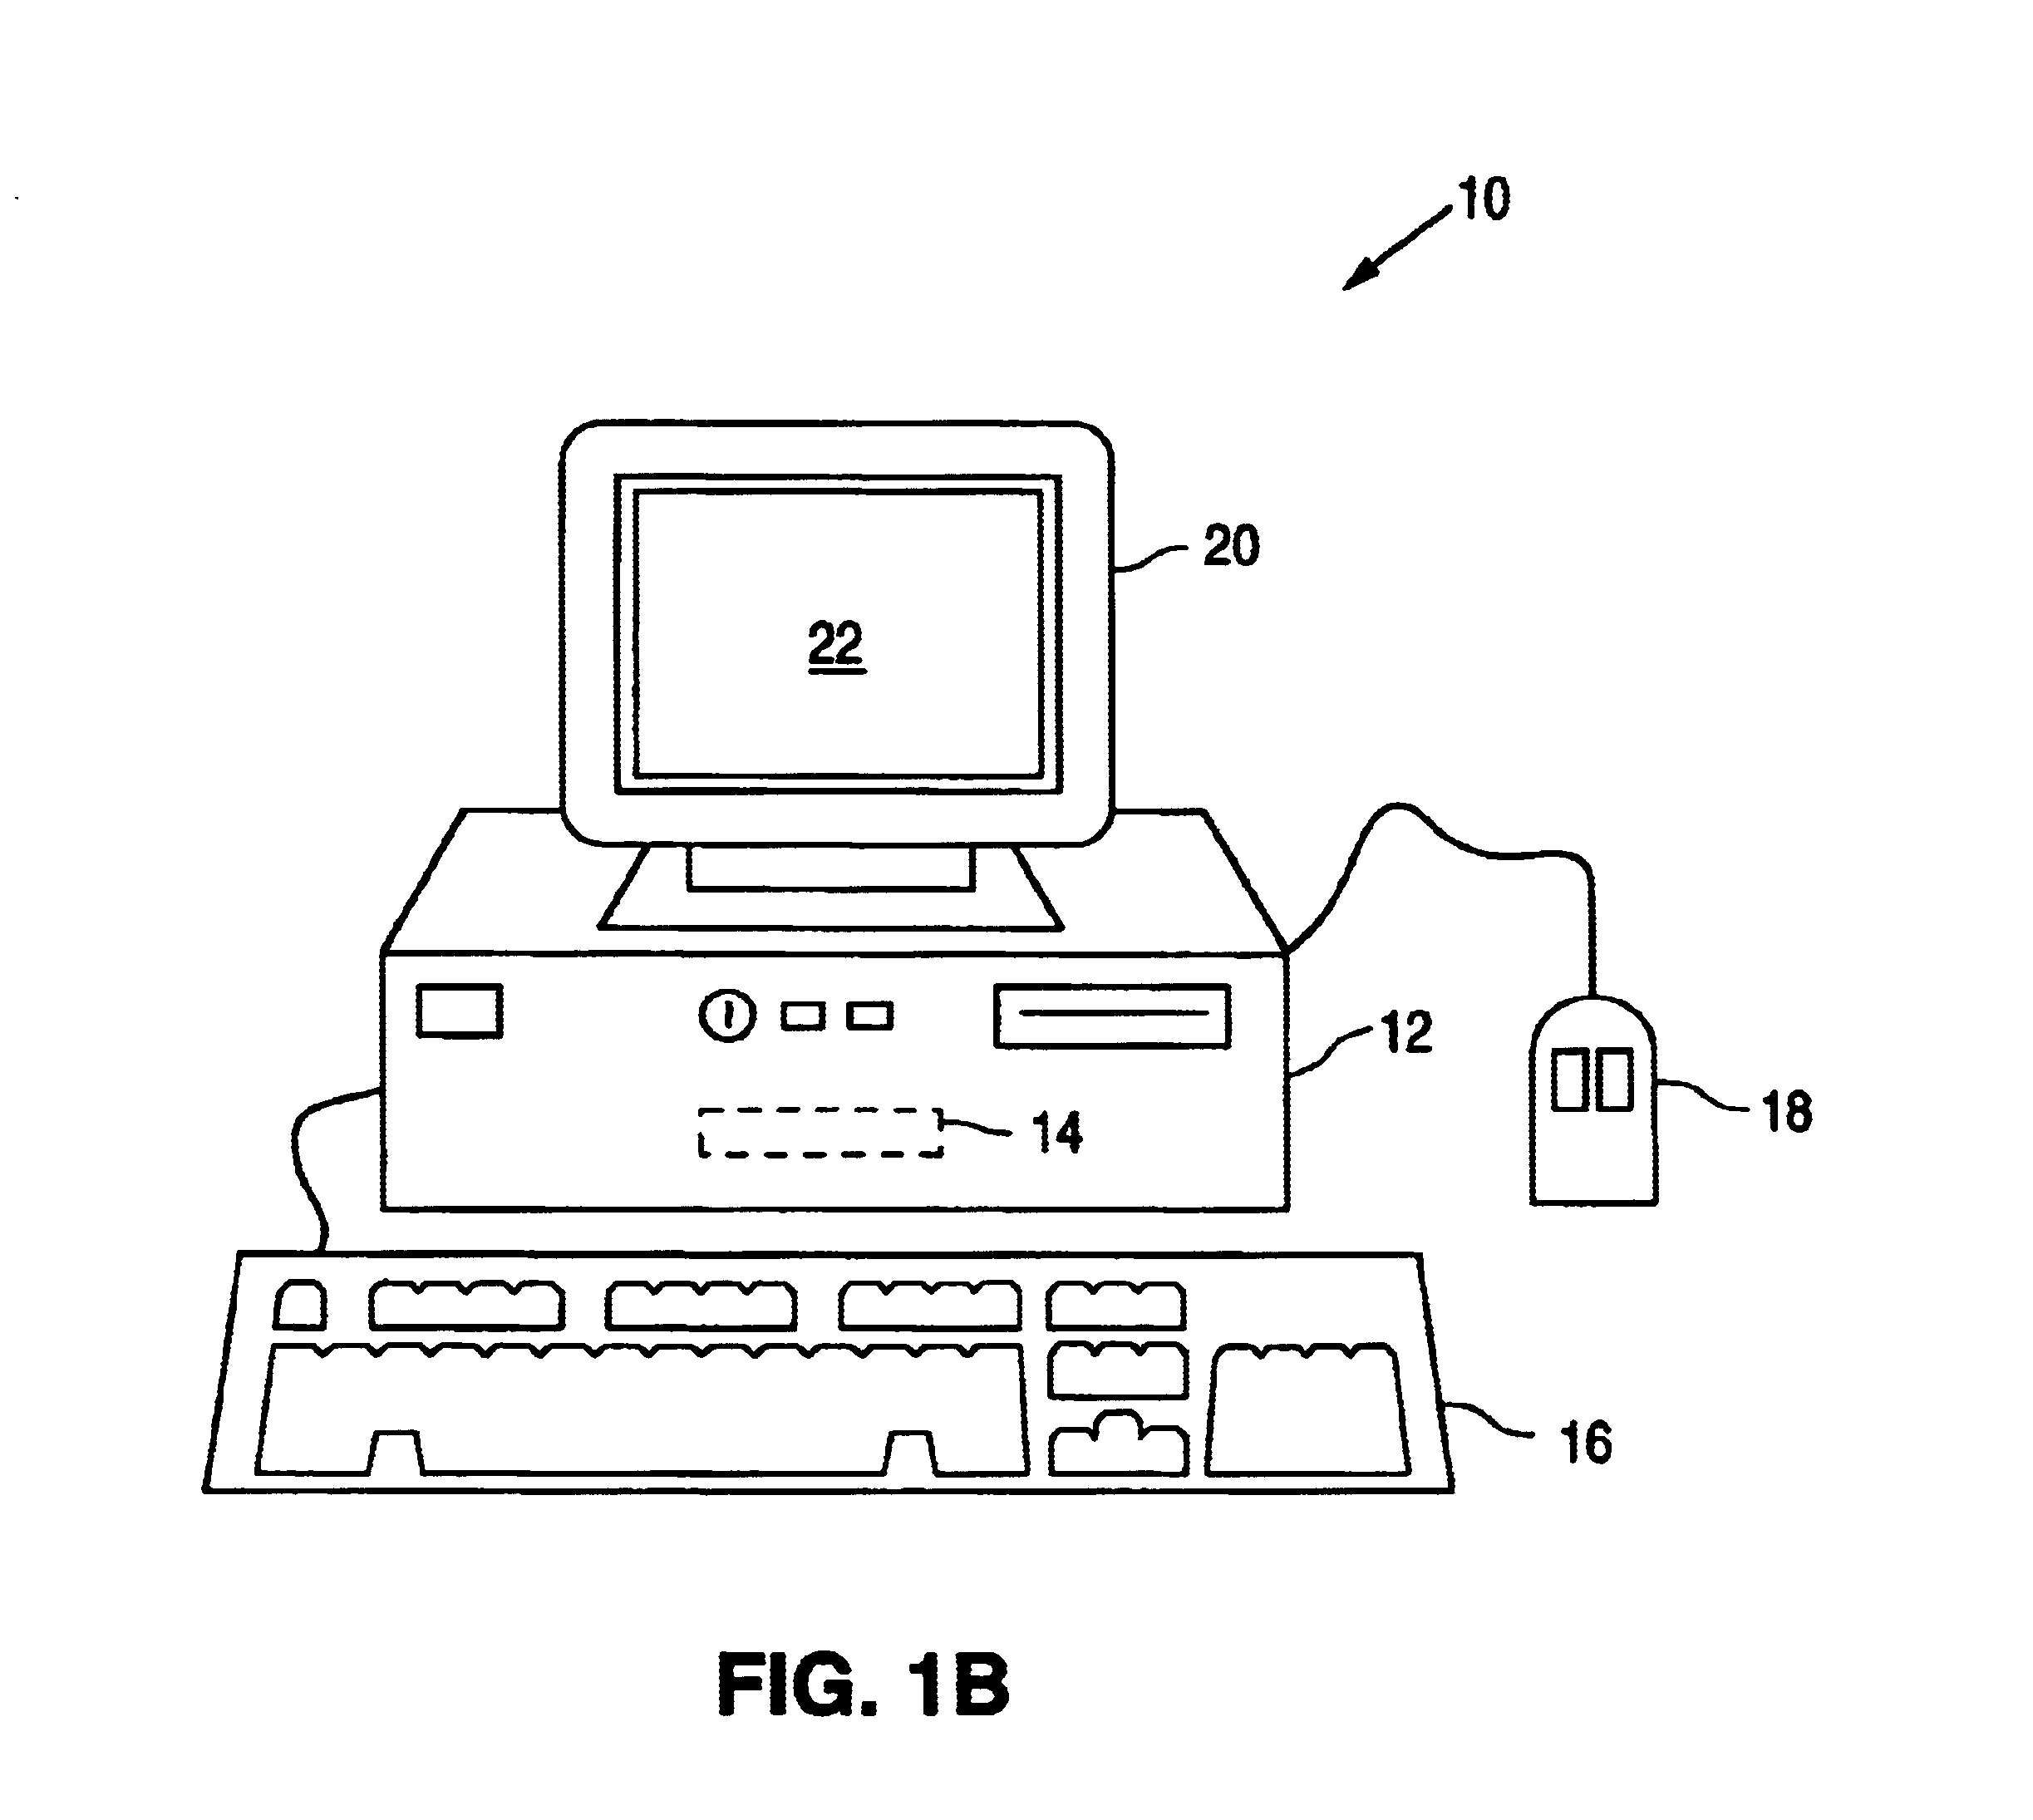 Augmented processing of information objects in a distributed messaging framework in a computer network